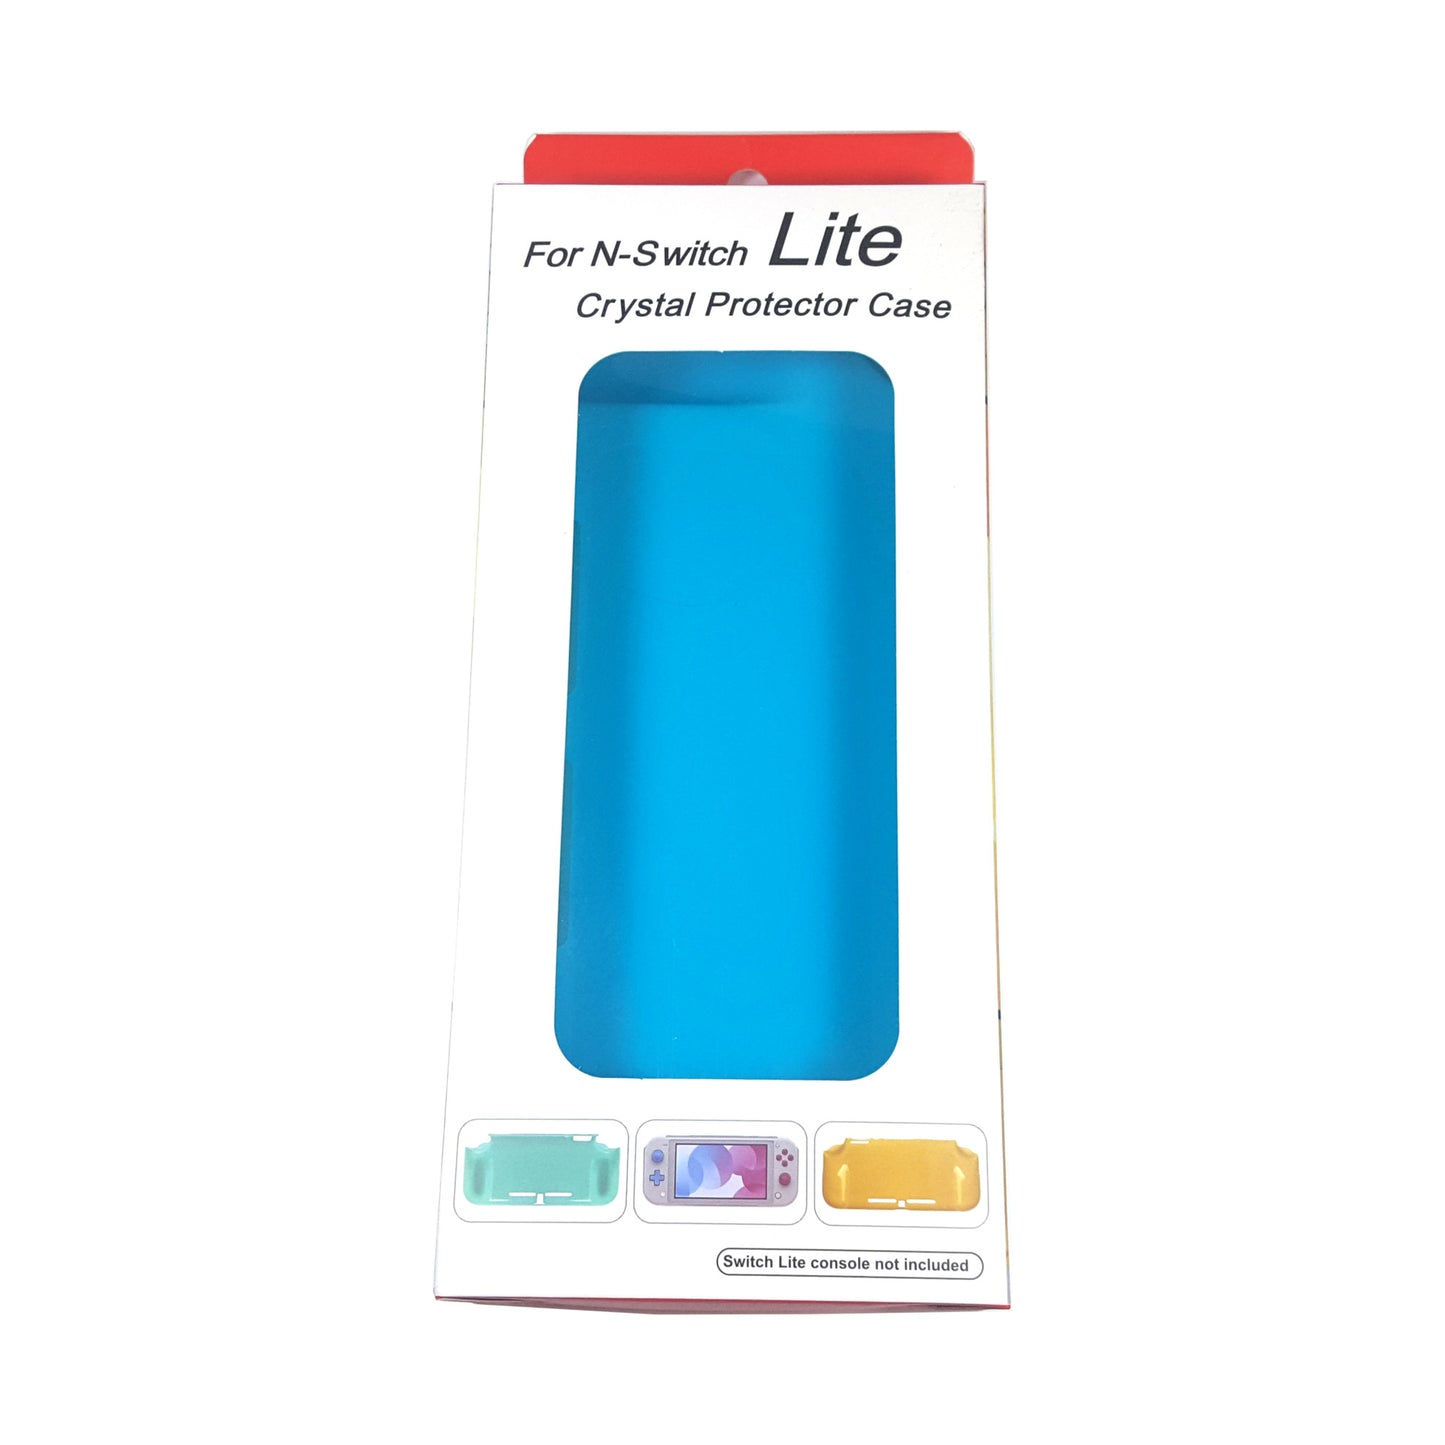 Crystal Protector Case for Nintendo Switch Lite Rigid Plastic - Turquoise